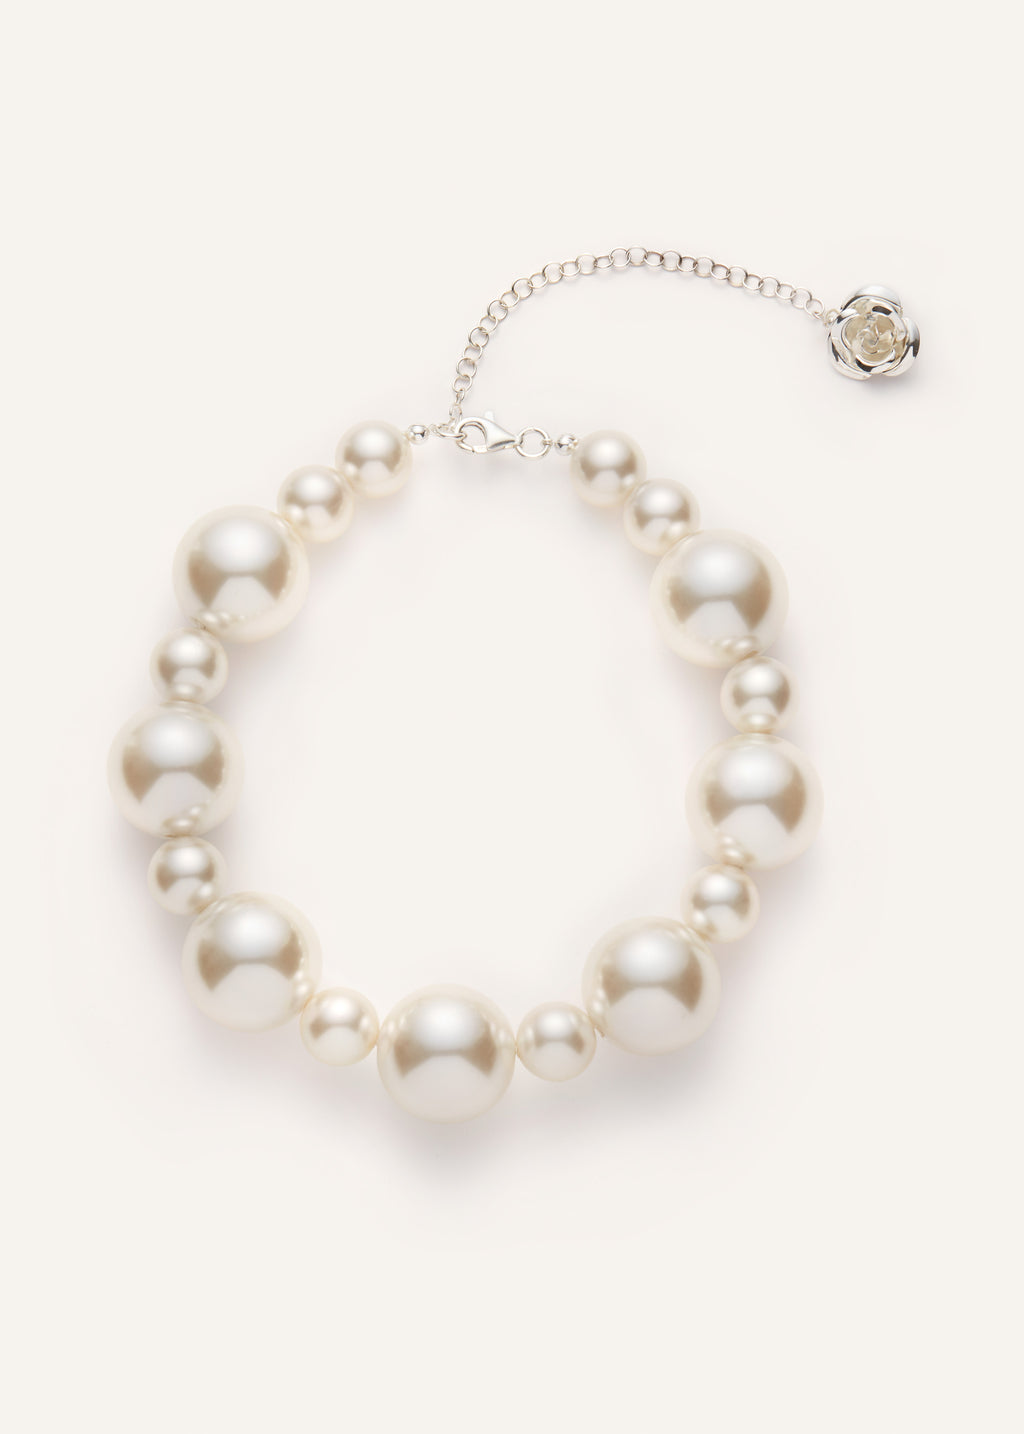 Variant Pearl Necklace